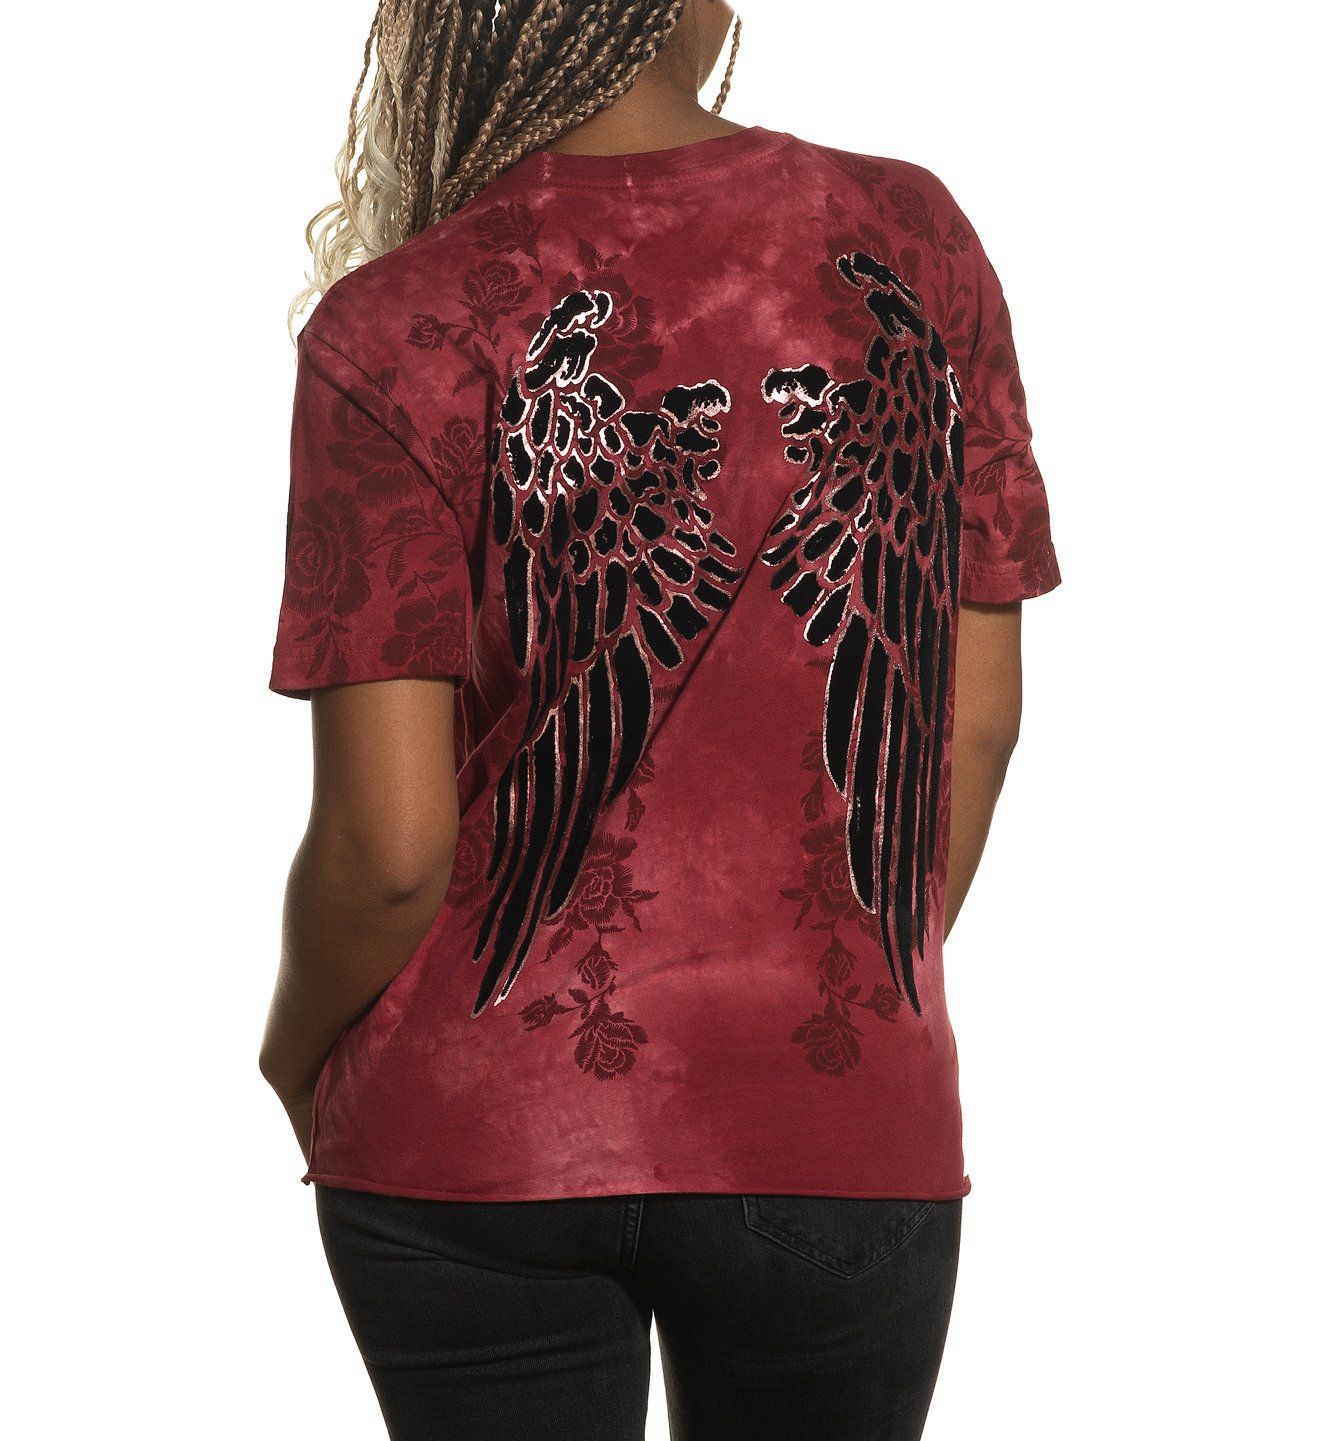 Praise Wings - Affliction Clothing